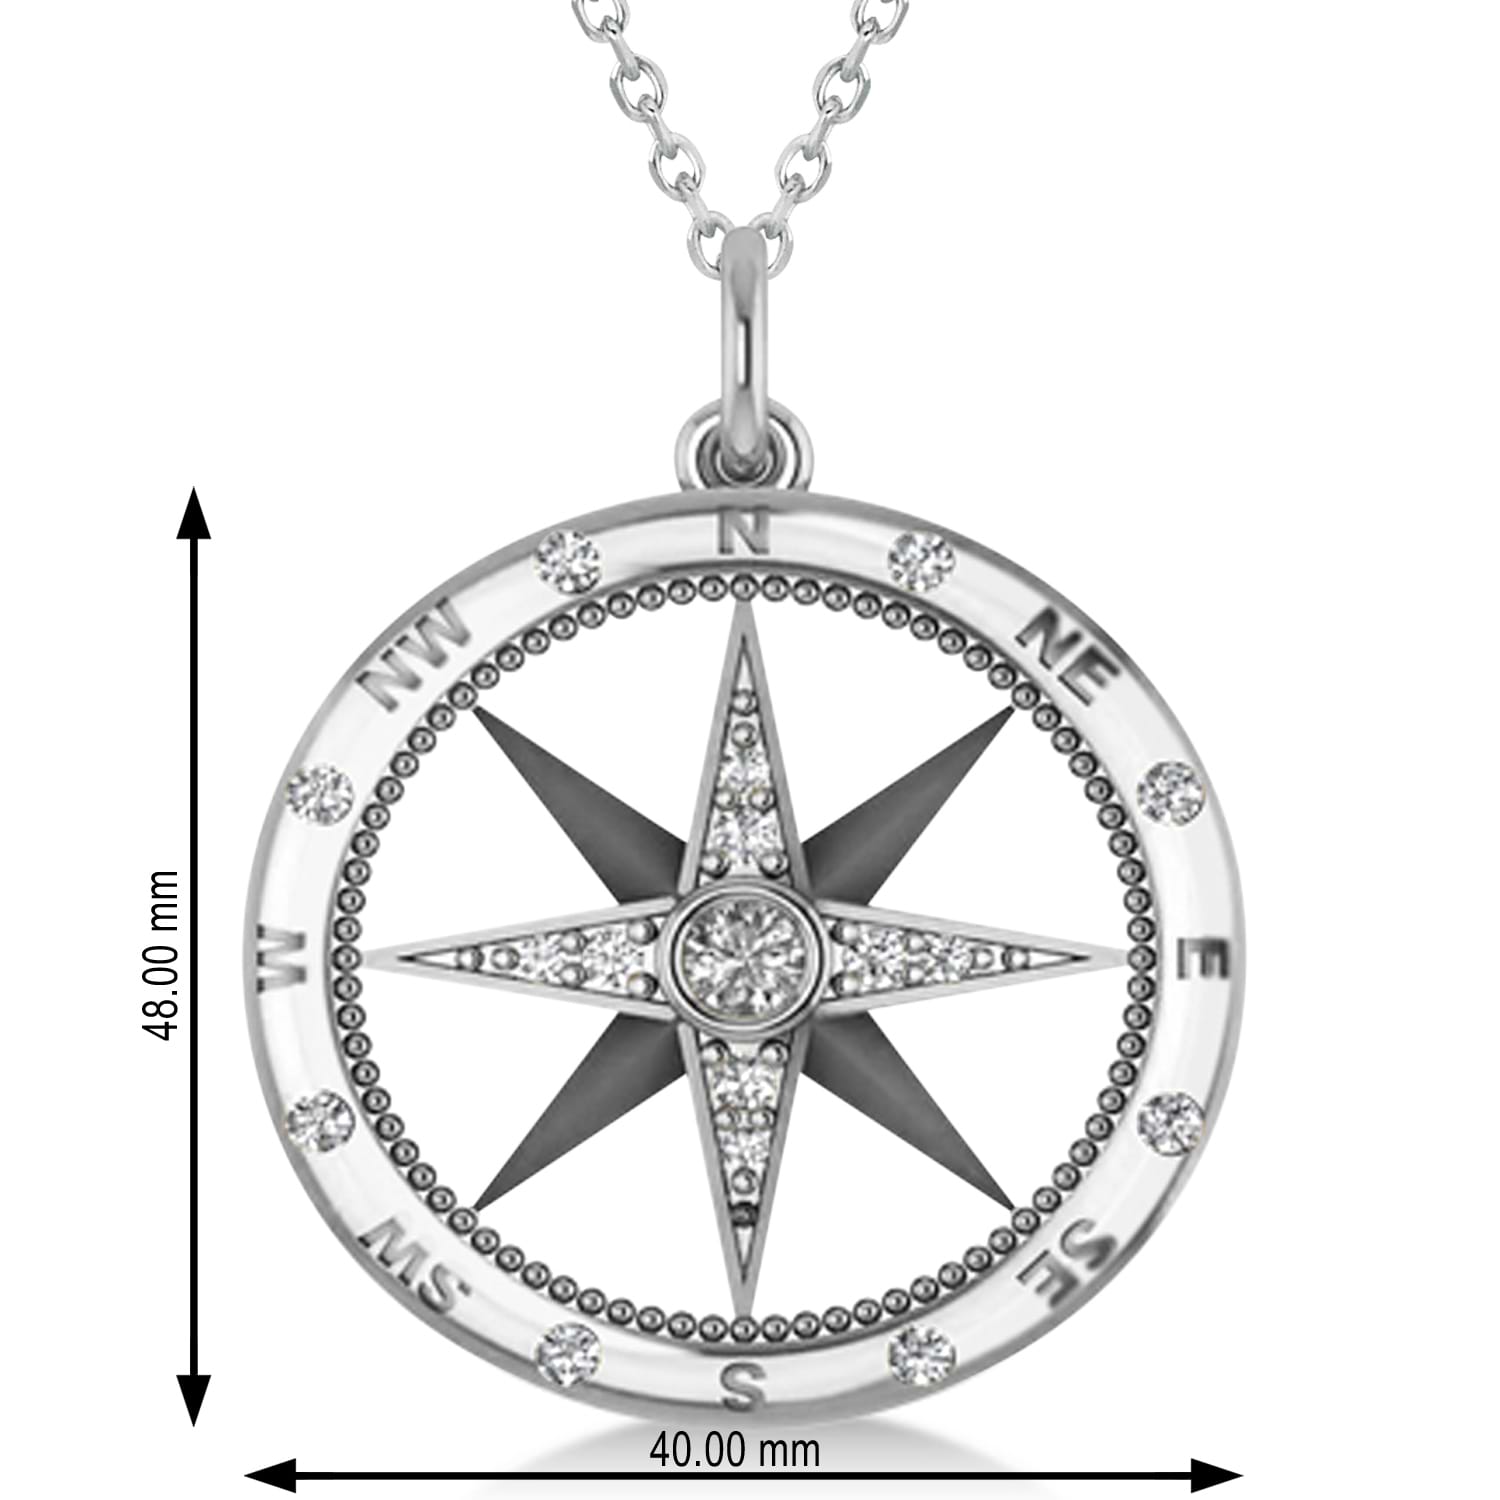 Extra Large Compass Necklace Pendant For Men Lab Grown Diamond Accented 14k White Gold (0.45ct)